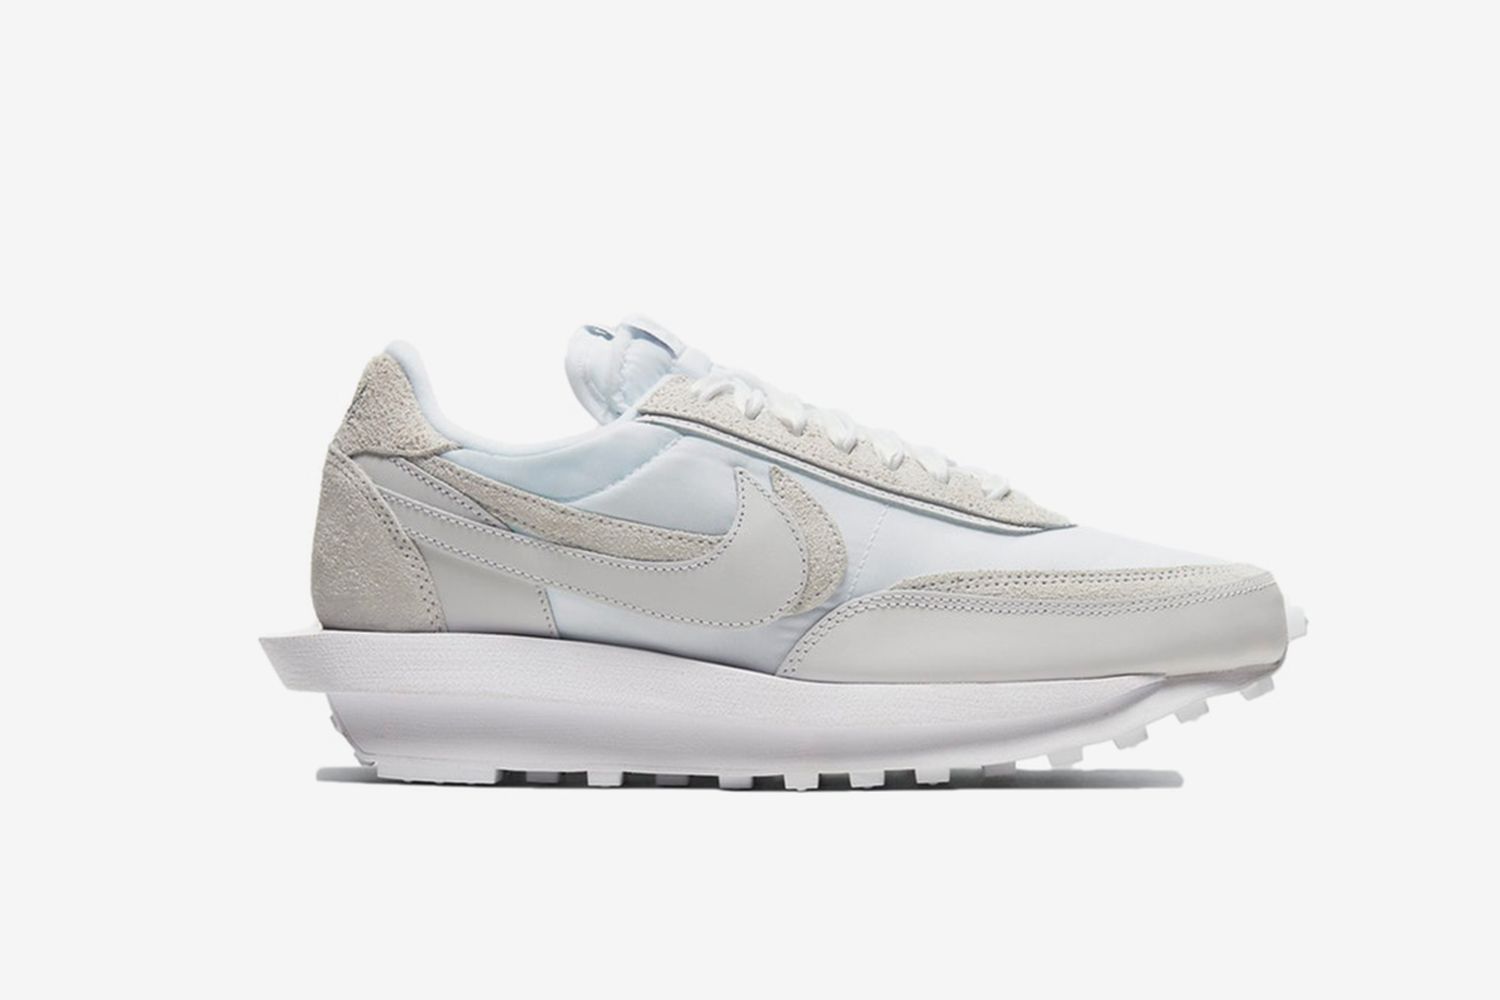 Where to Shop the New sacai x Nike LDWaffle: Resale Prices